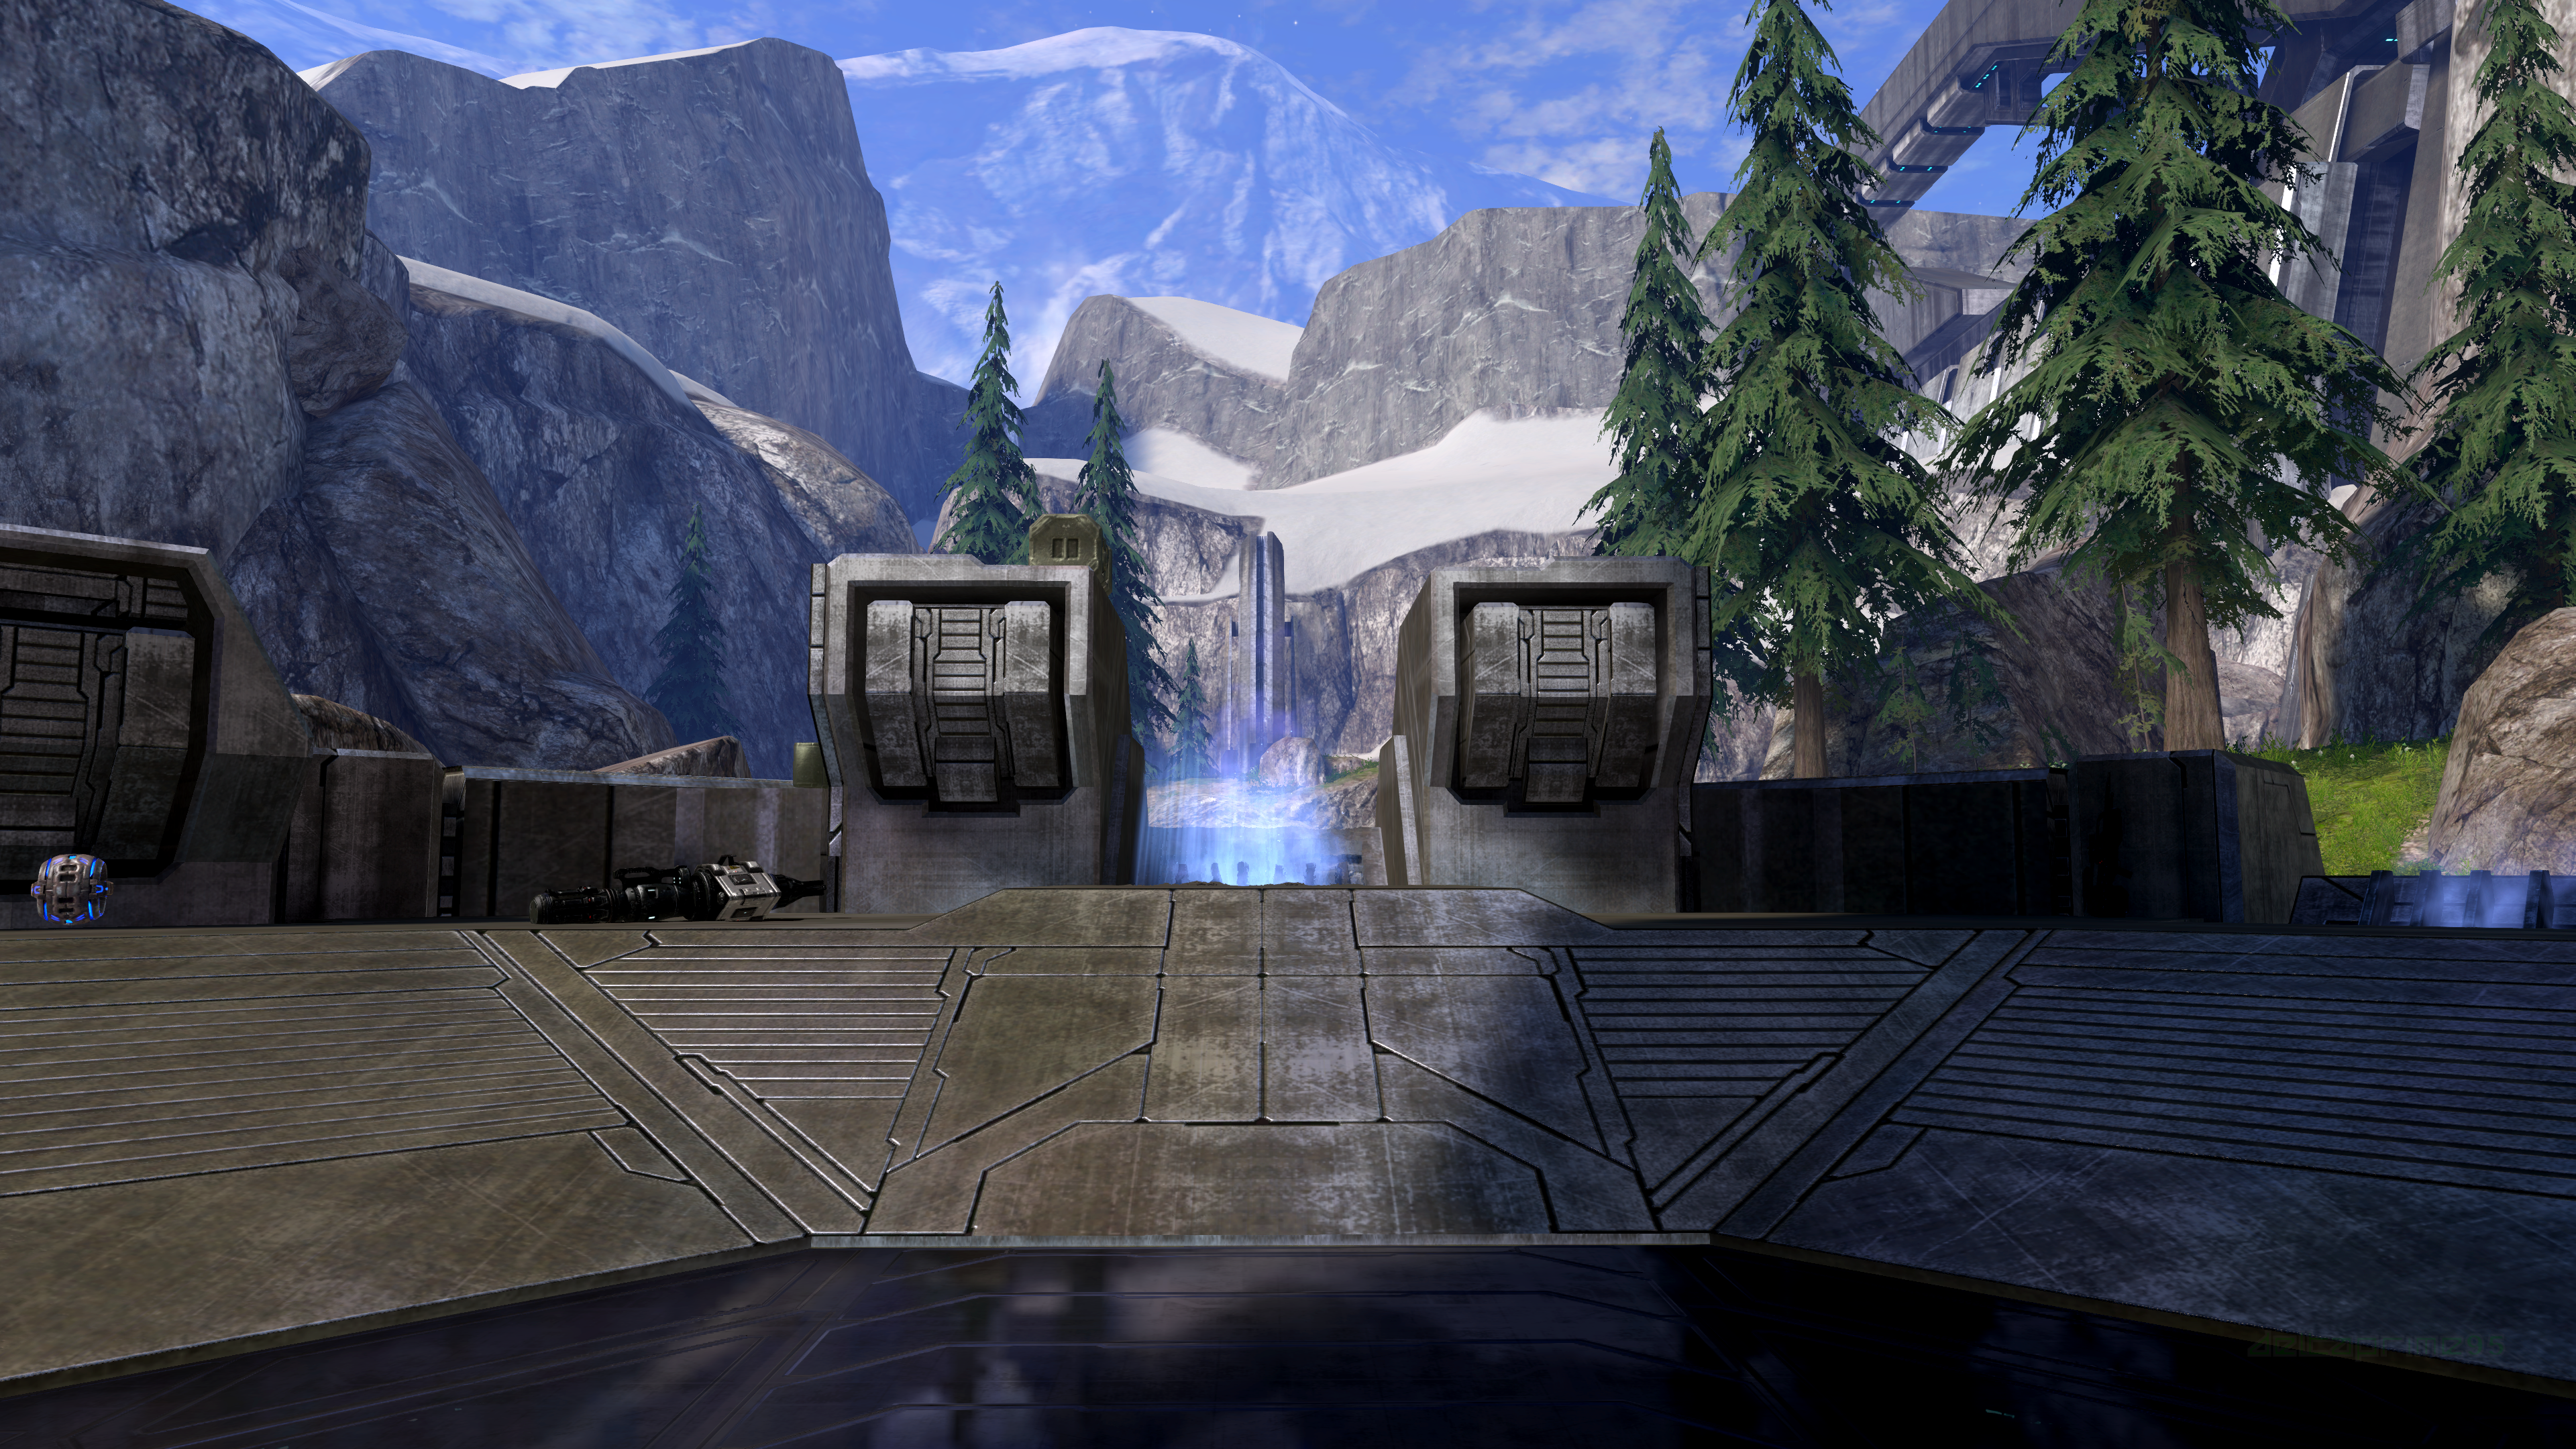 General 3840x2160 Halo 3 science fiction futuristic Valhalla (Multiplayer Map) mountains video games PC gaming screen shot